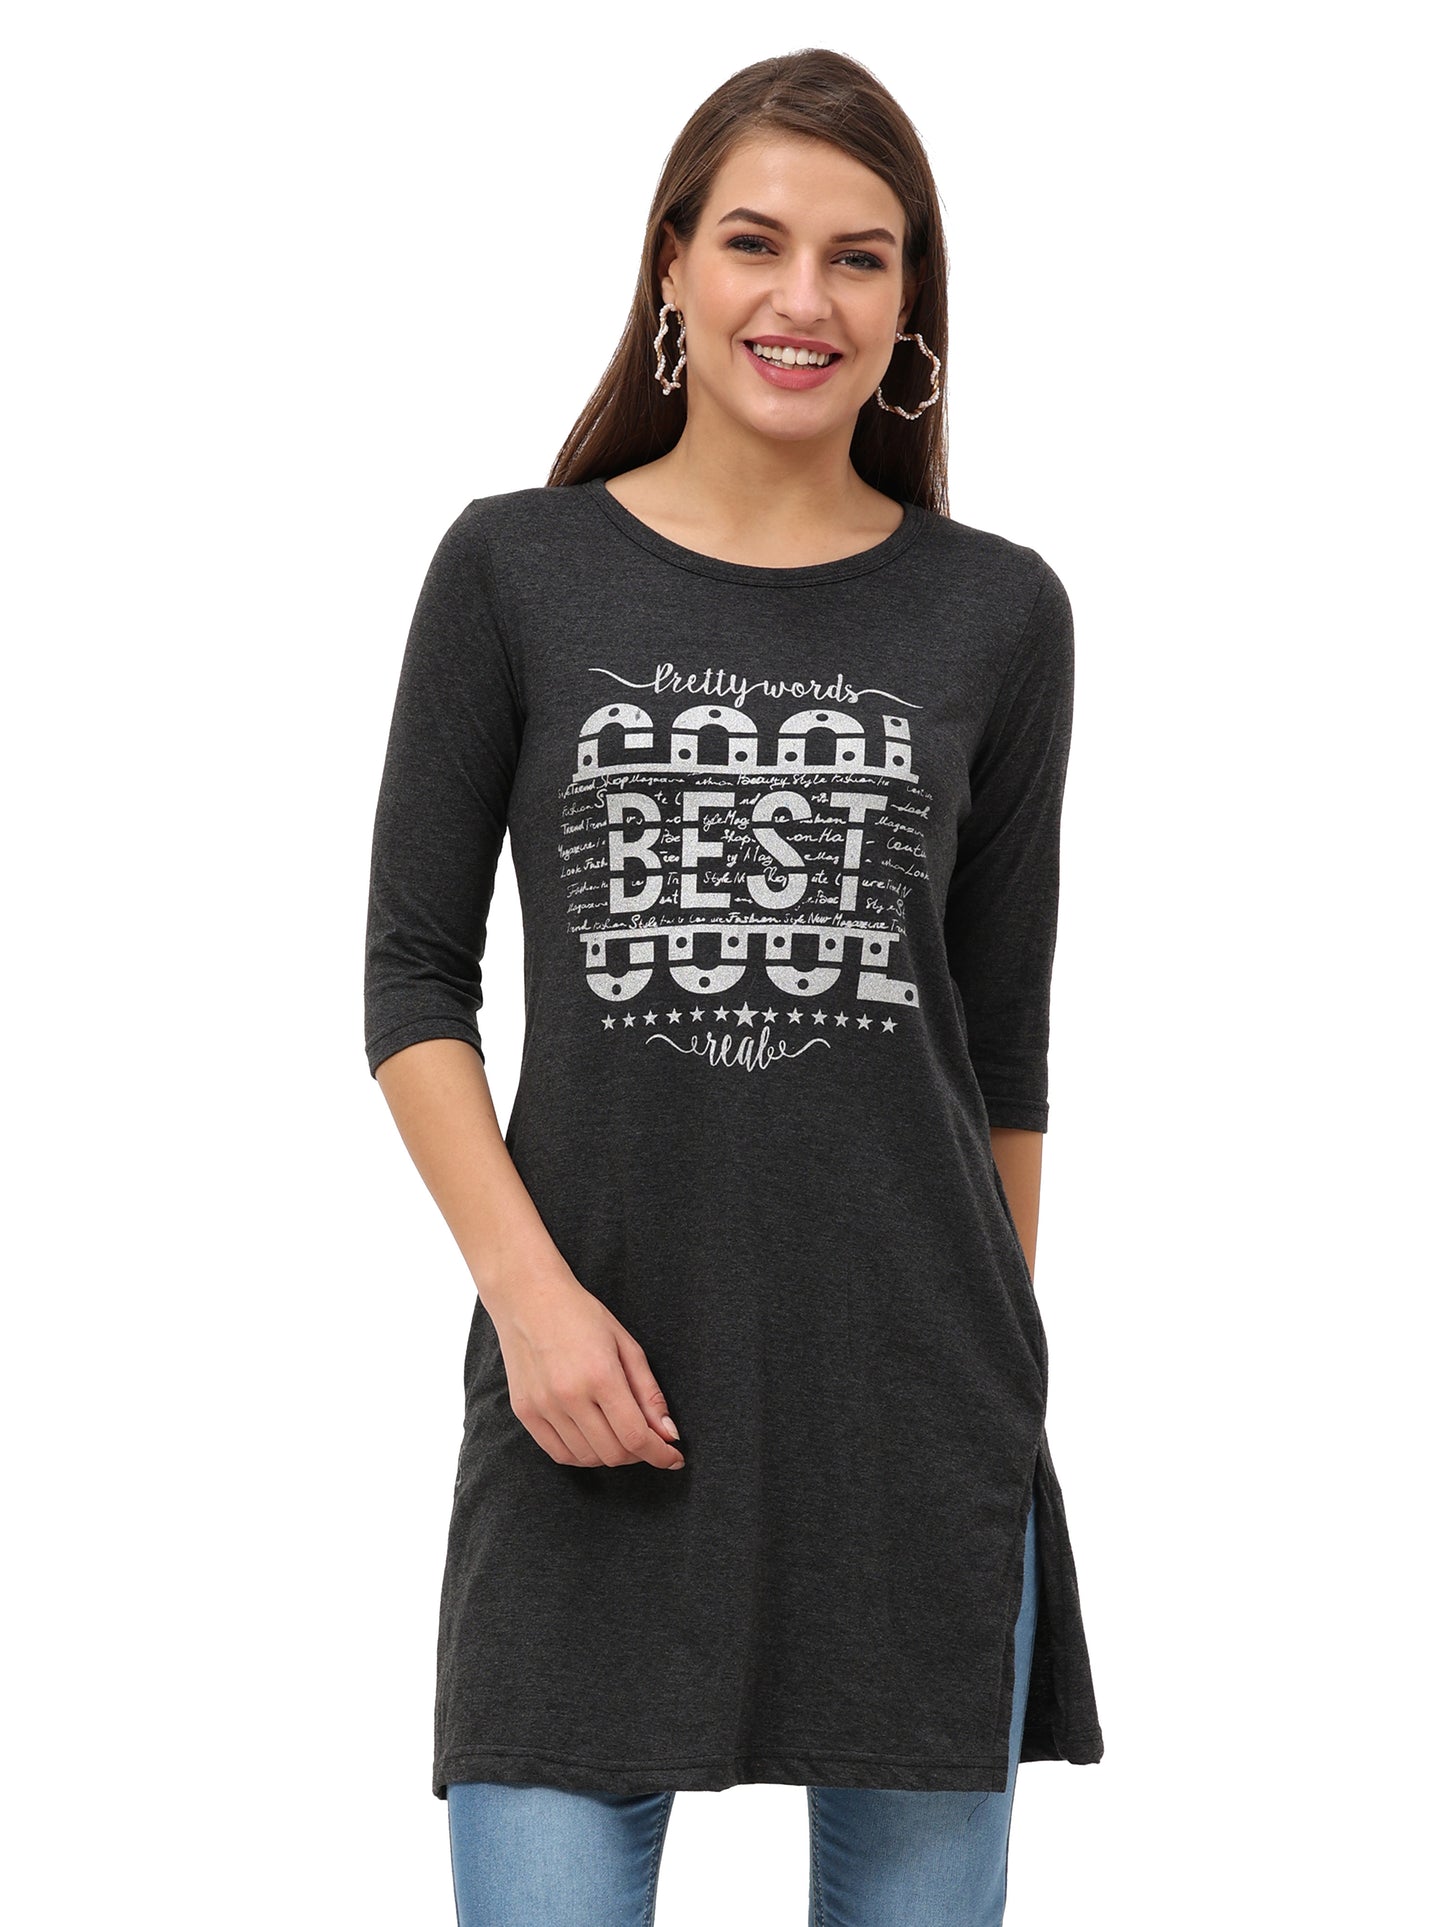 Women's Cotton Printed 3/4 Sleeve Long Top